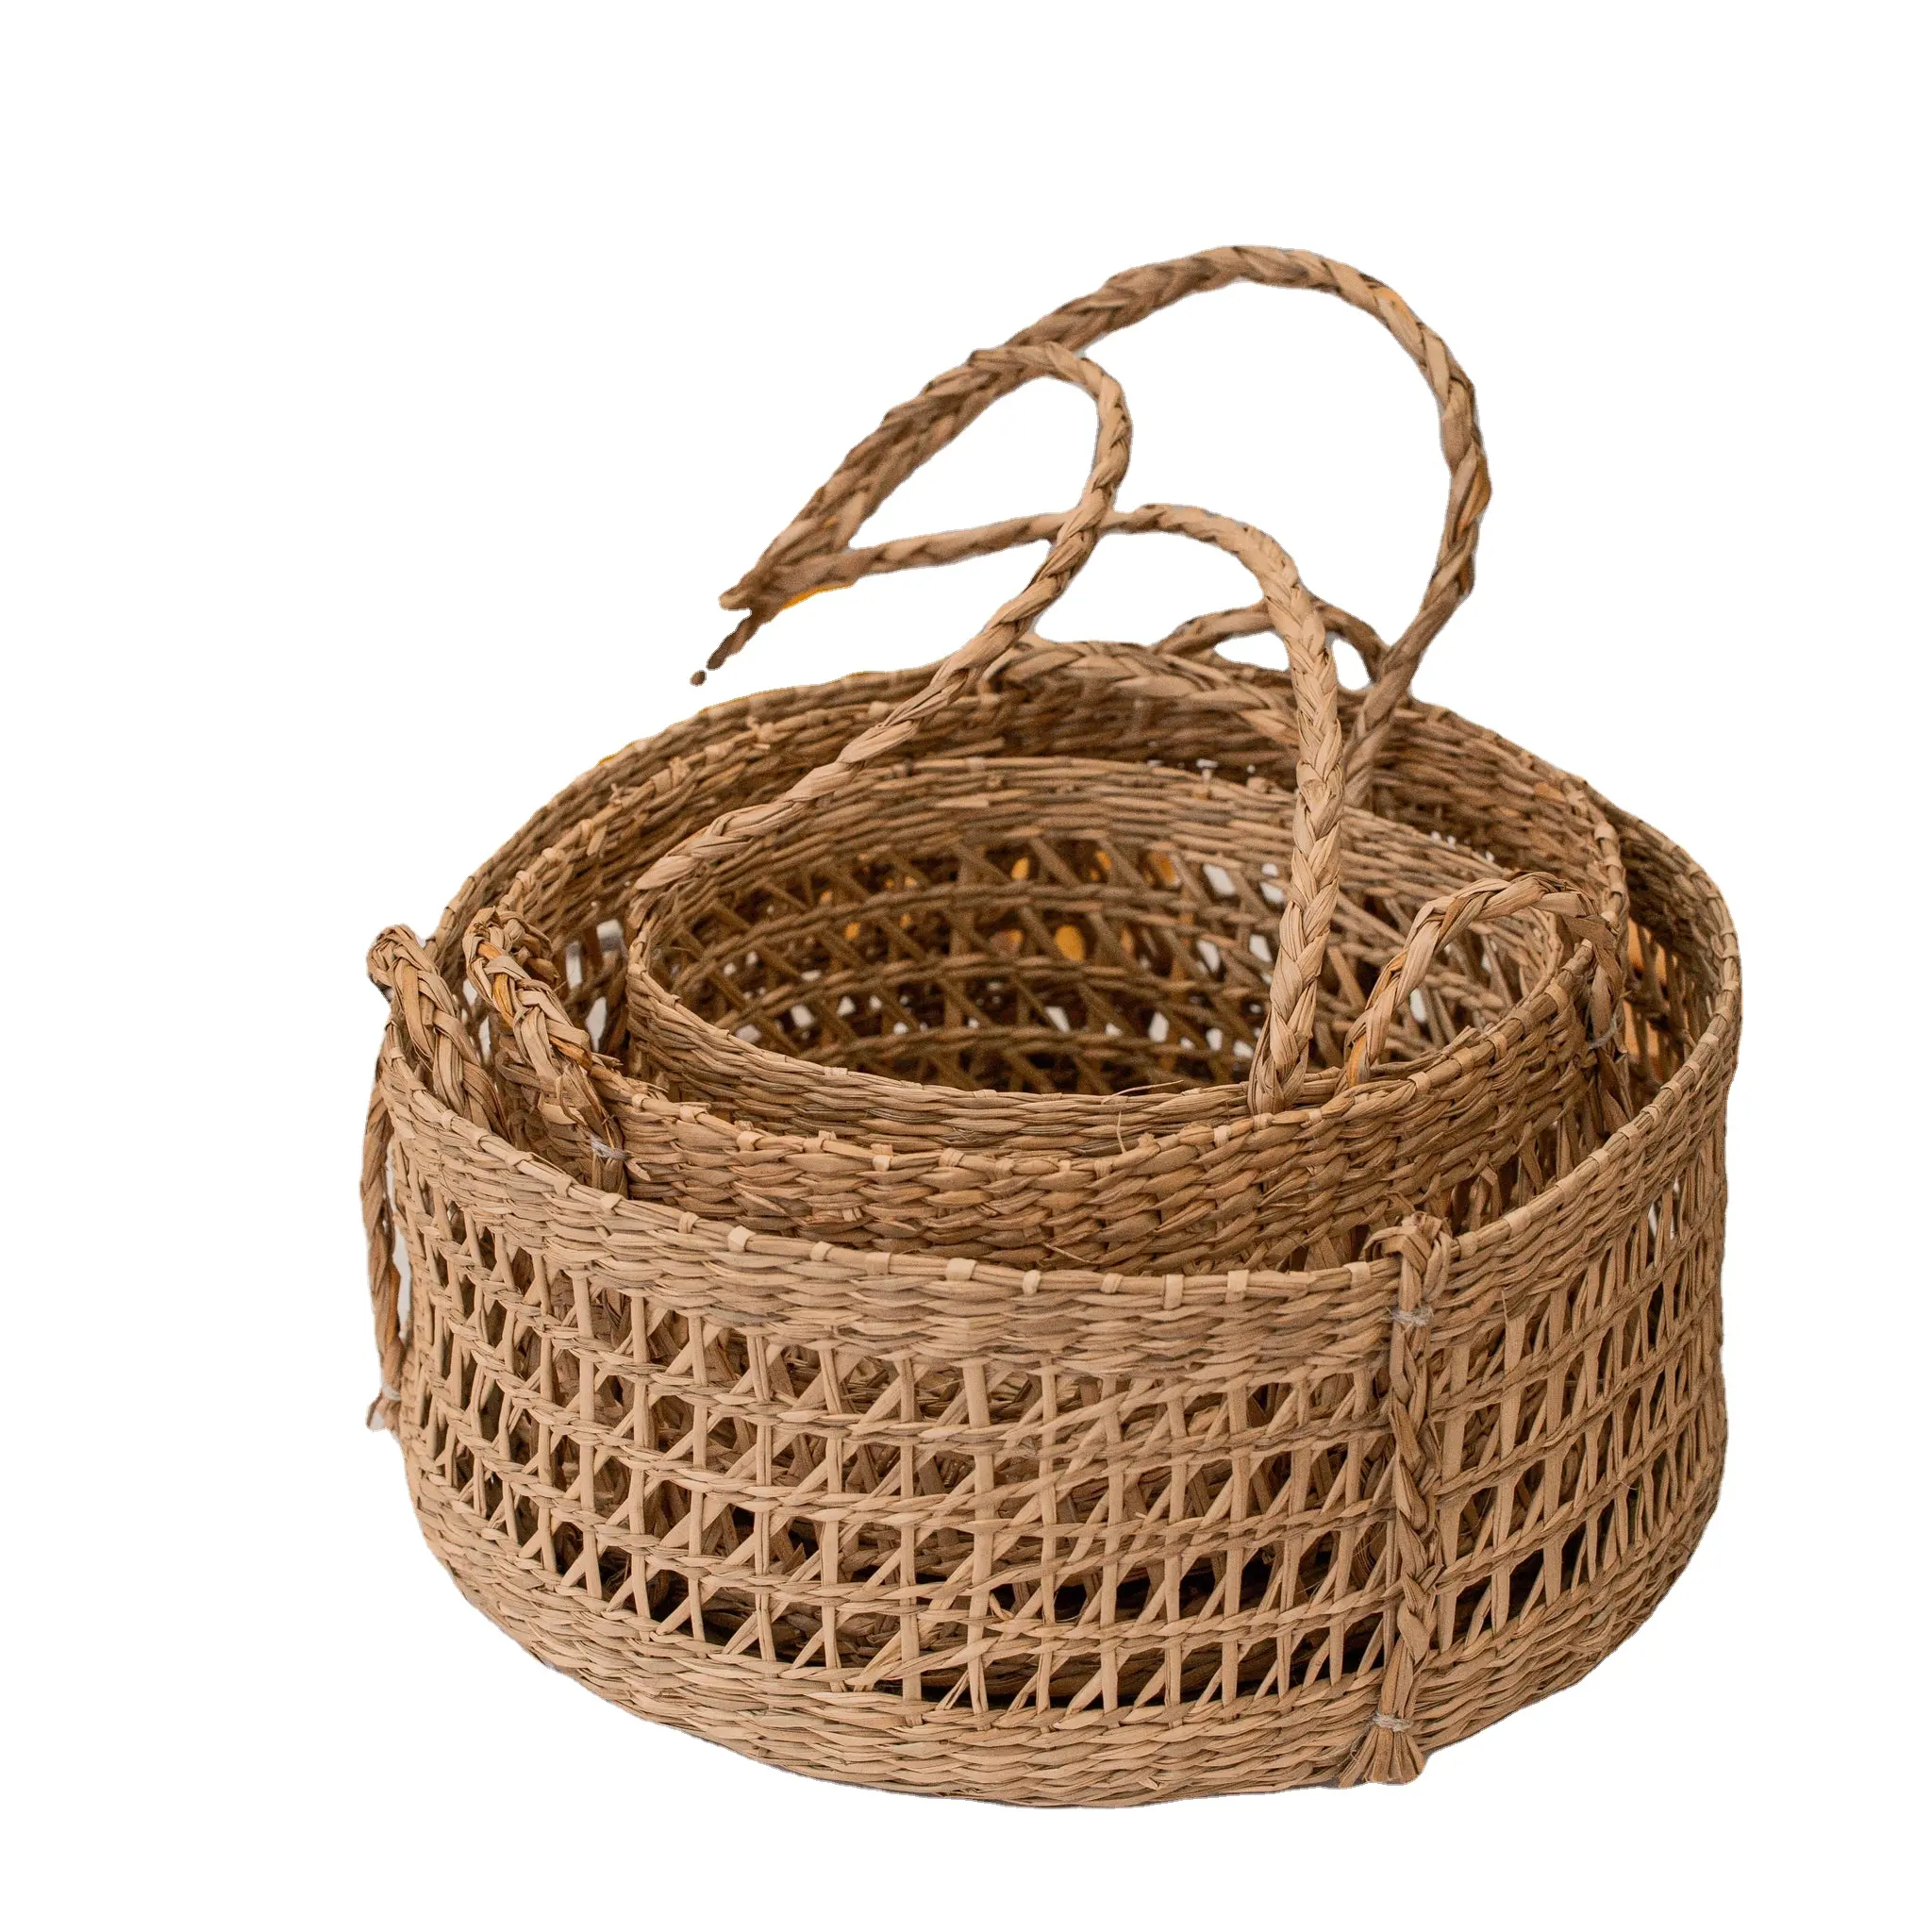 Hot cheap newest handwoven three Tiers Hanging Fruit foldable Seagrass Basket from Viet Nam